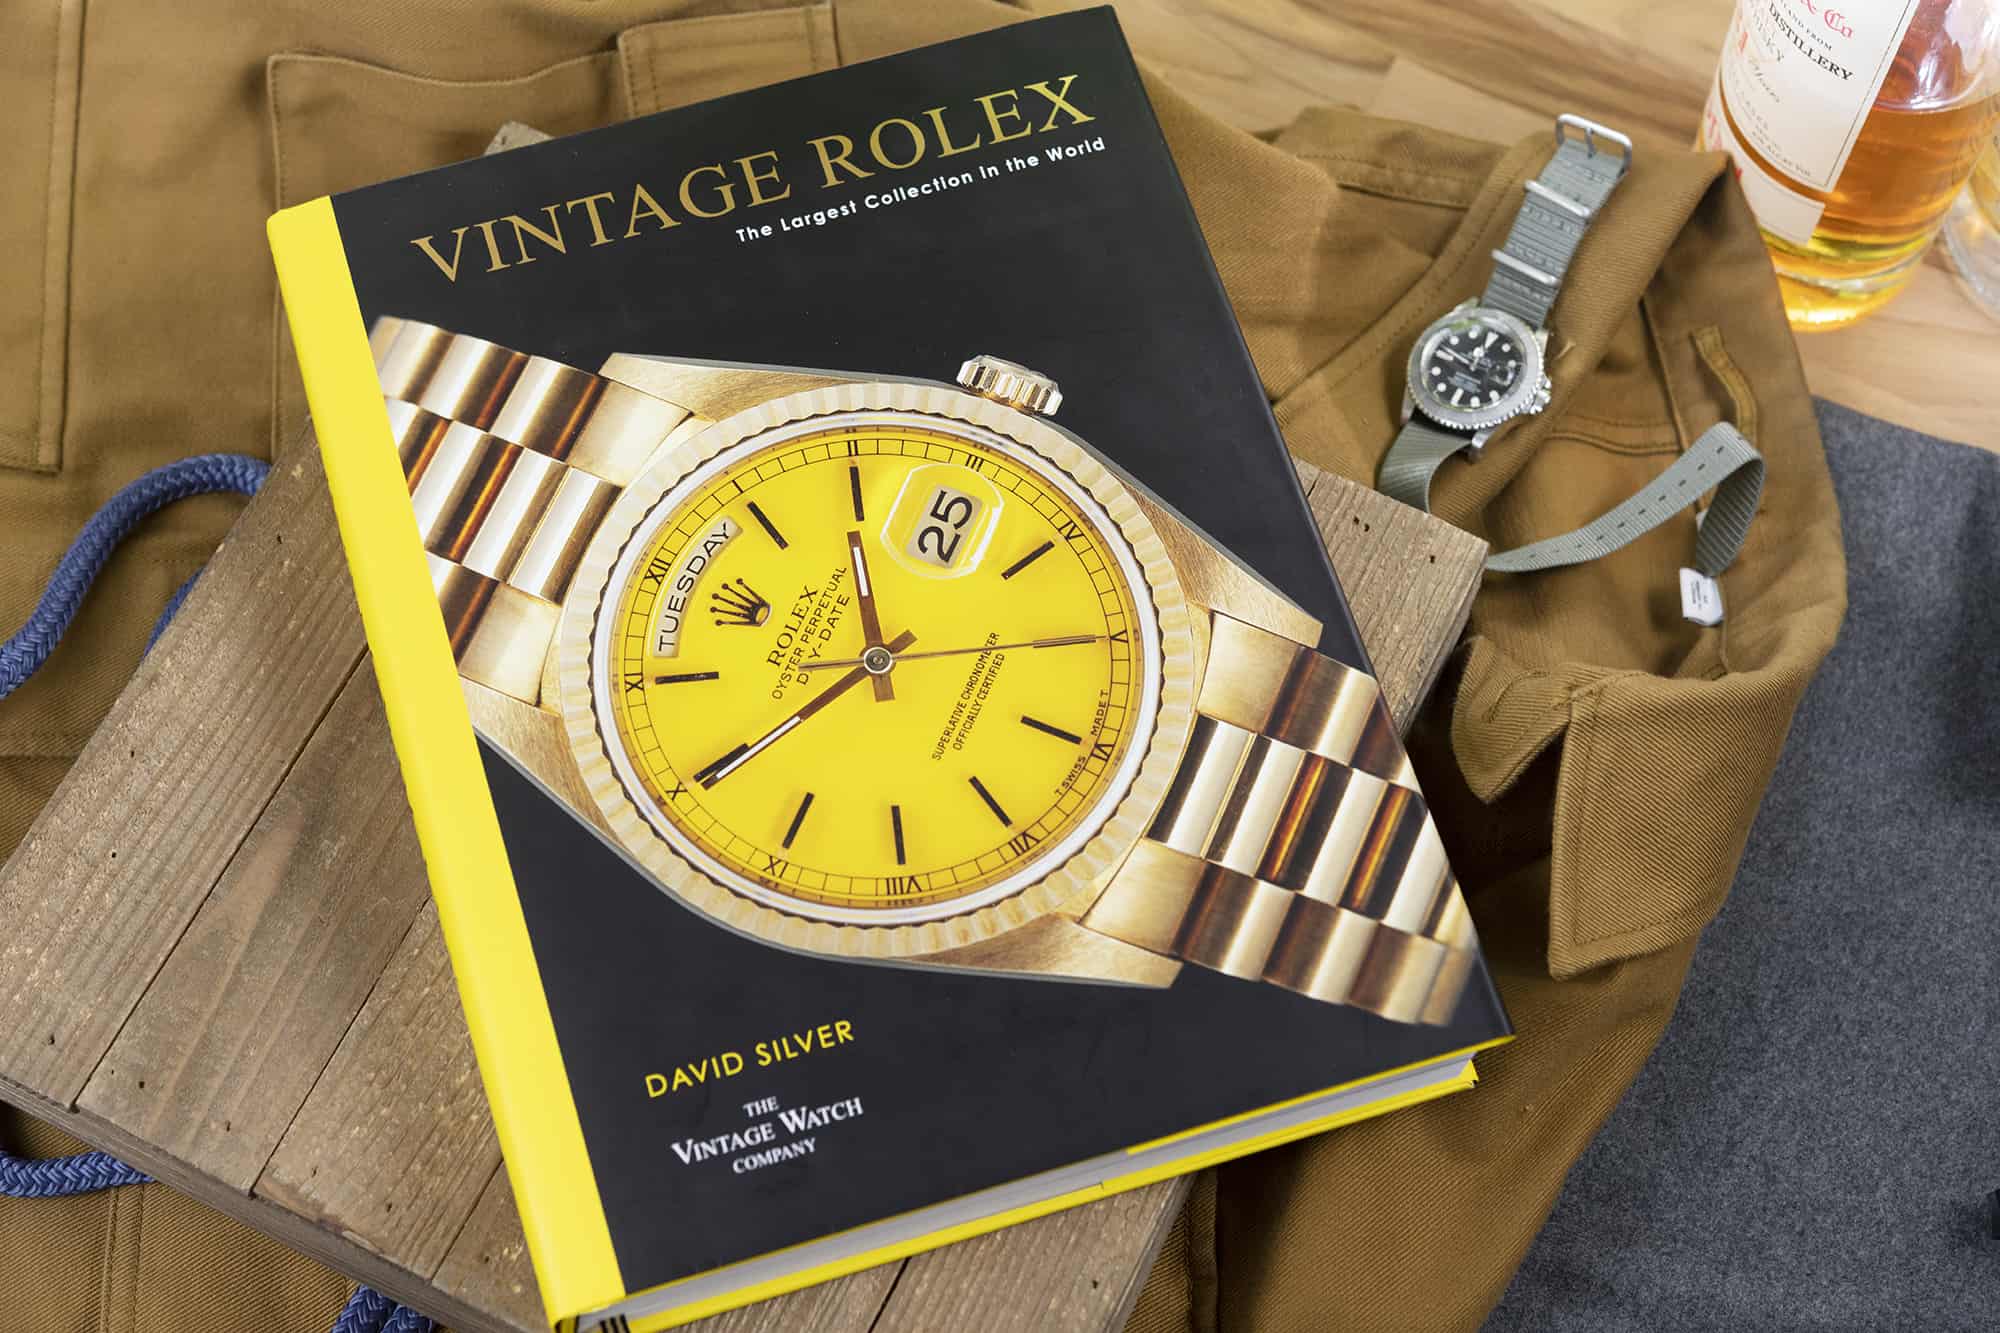 Book Review: Vintage Rolex, The Largest Collection In World - Worn & Wound